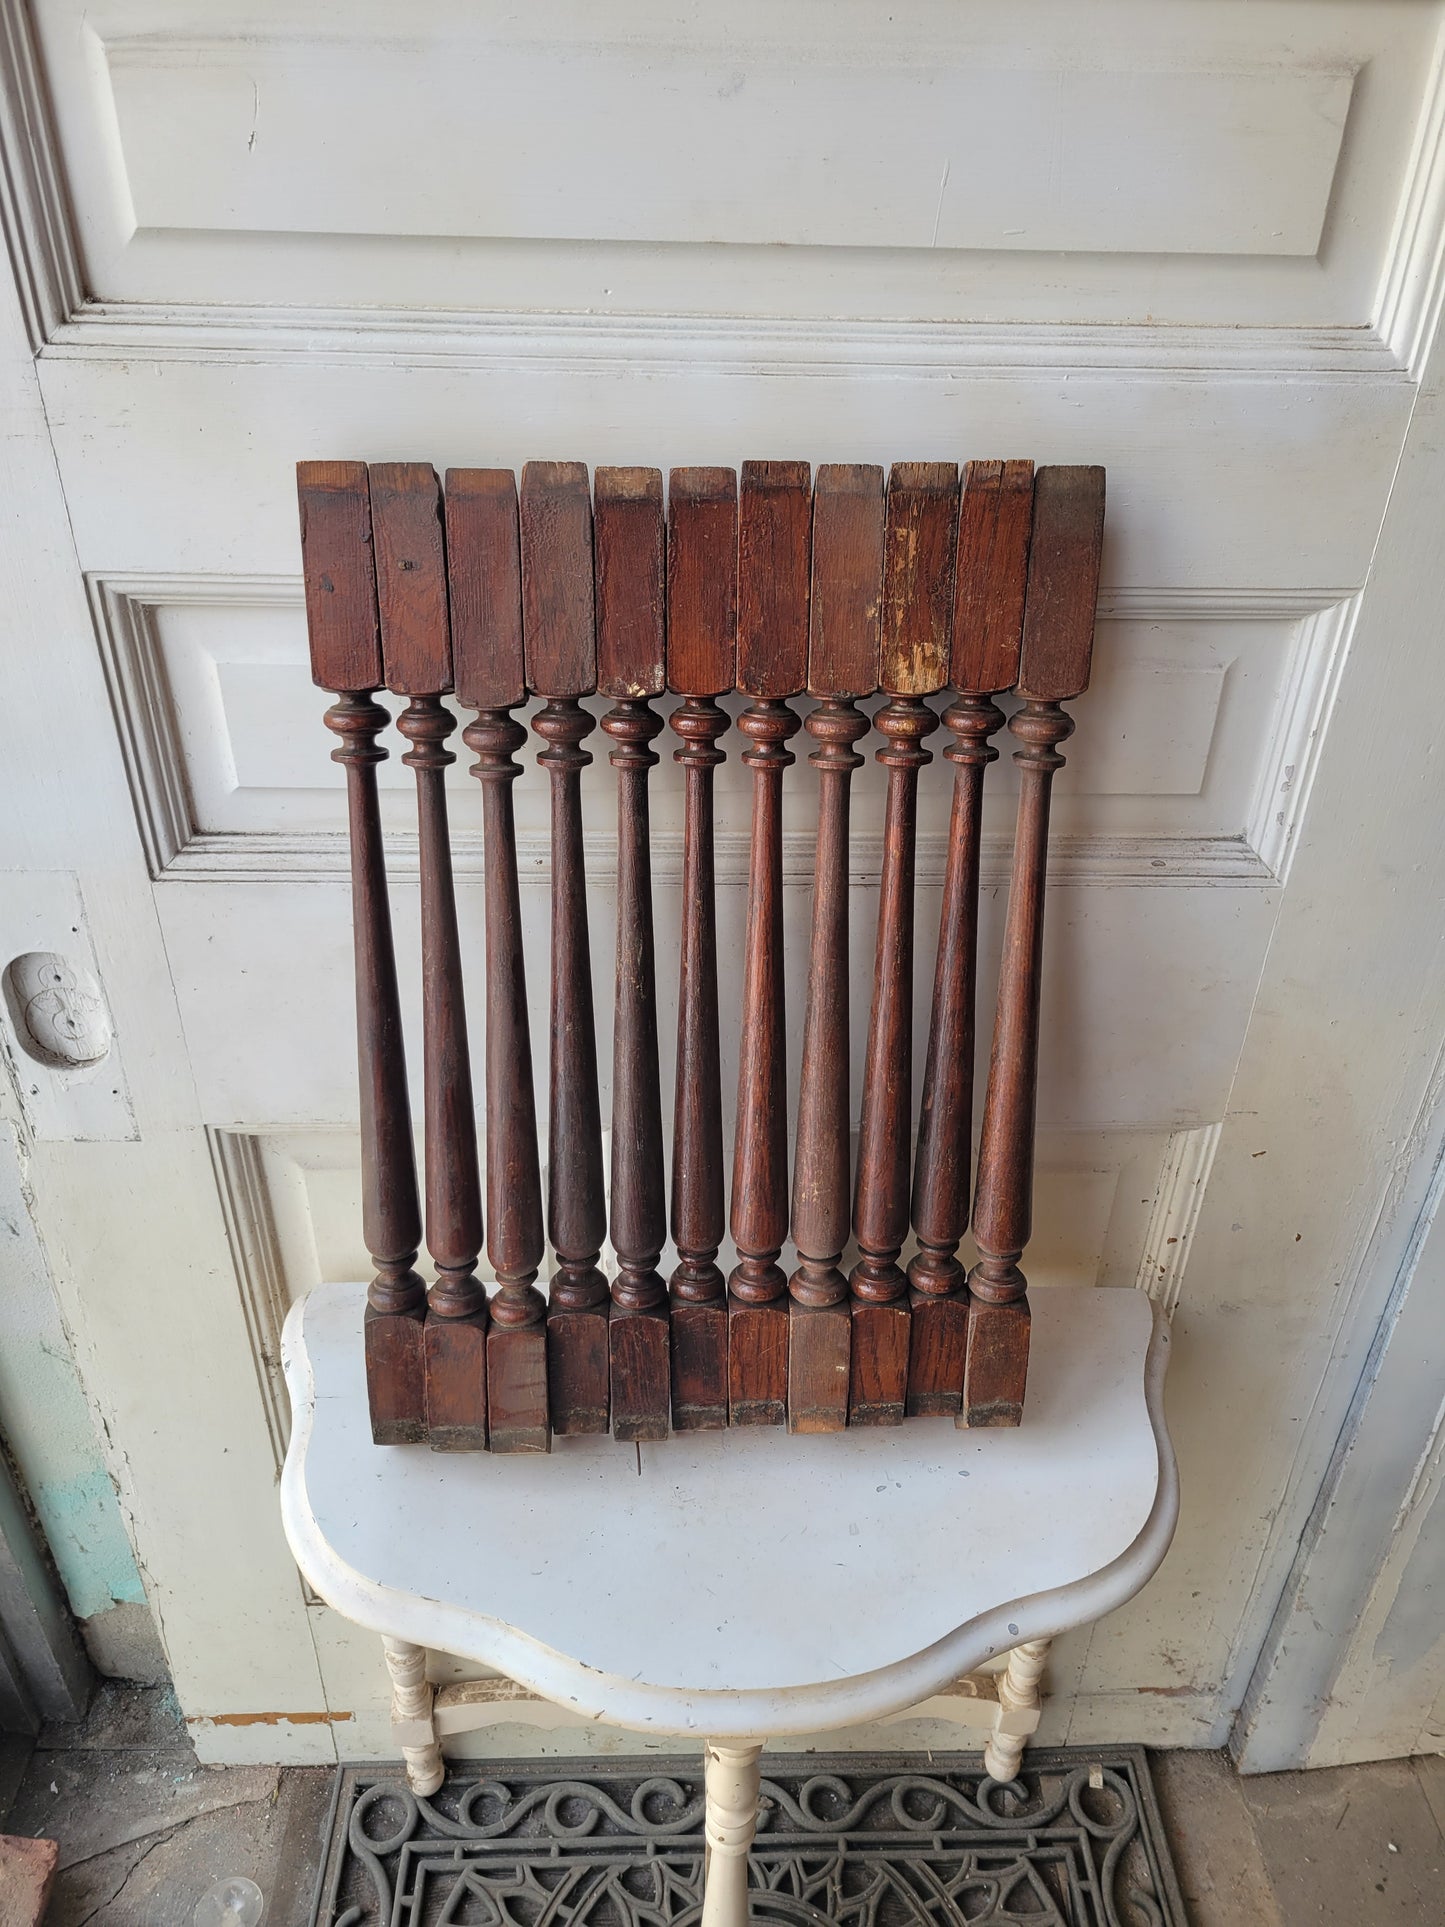 Eleven Antique Turned Wood Spindles, 11 Victorian Staircase Spindles #012804